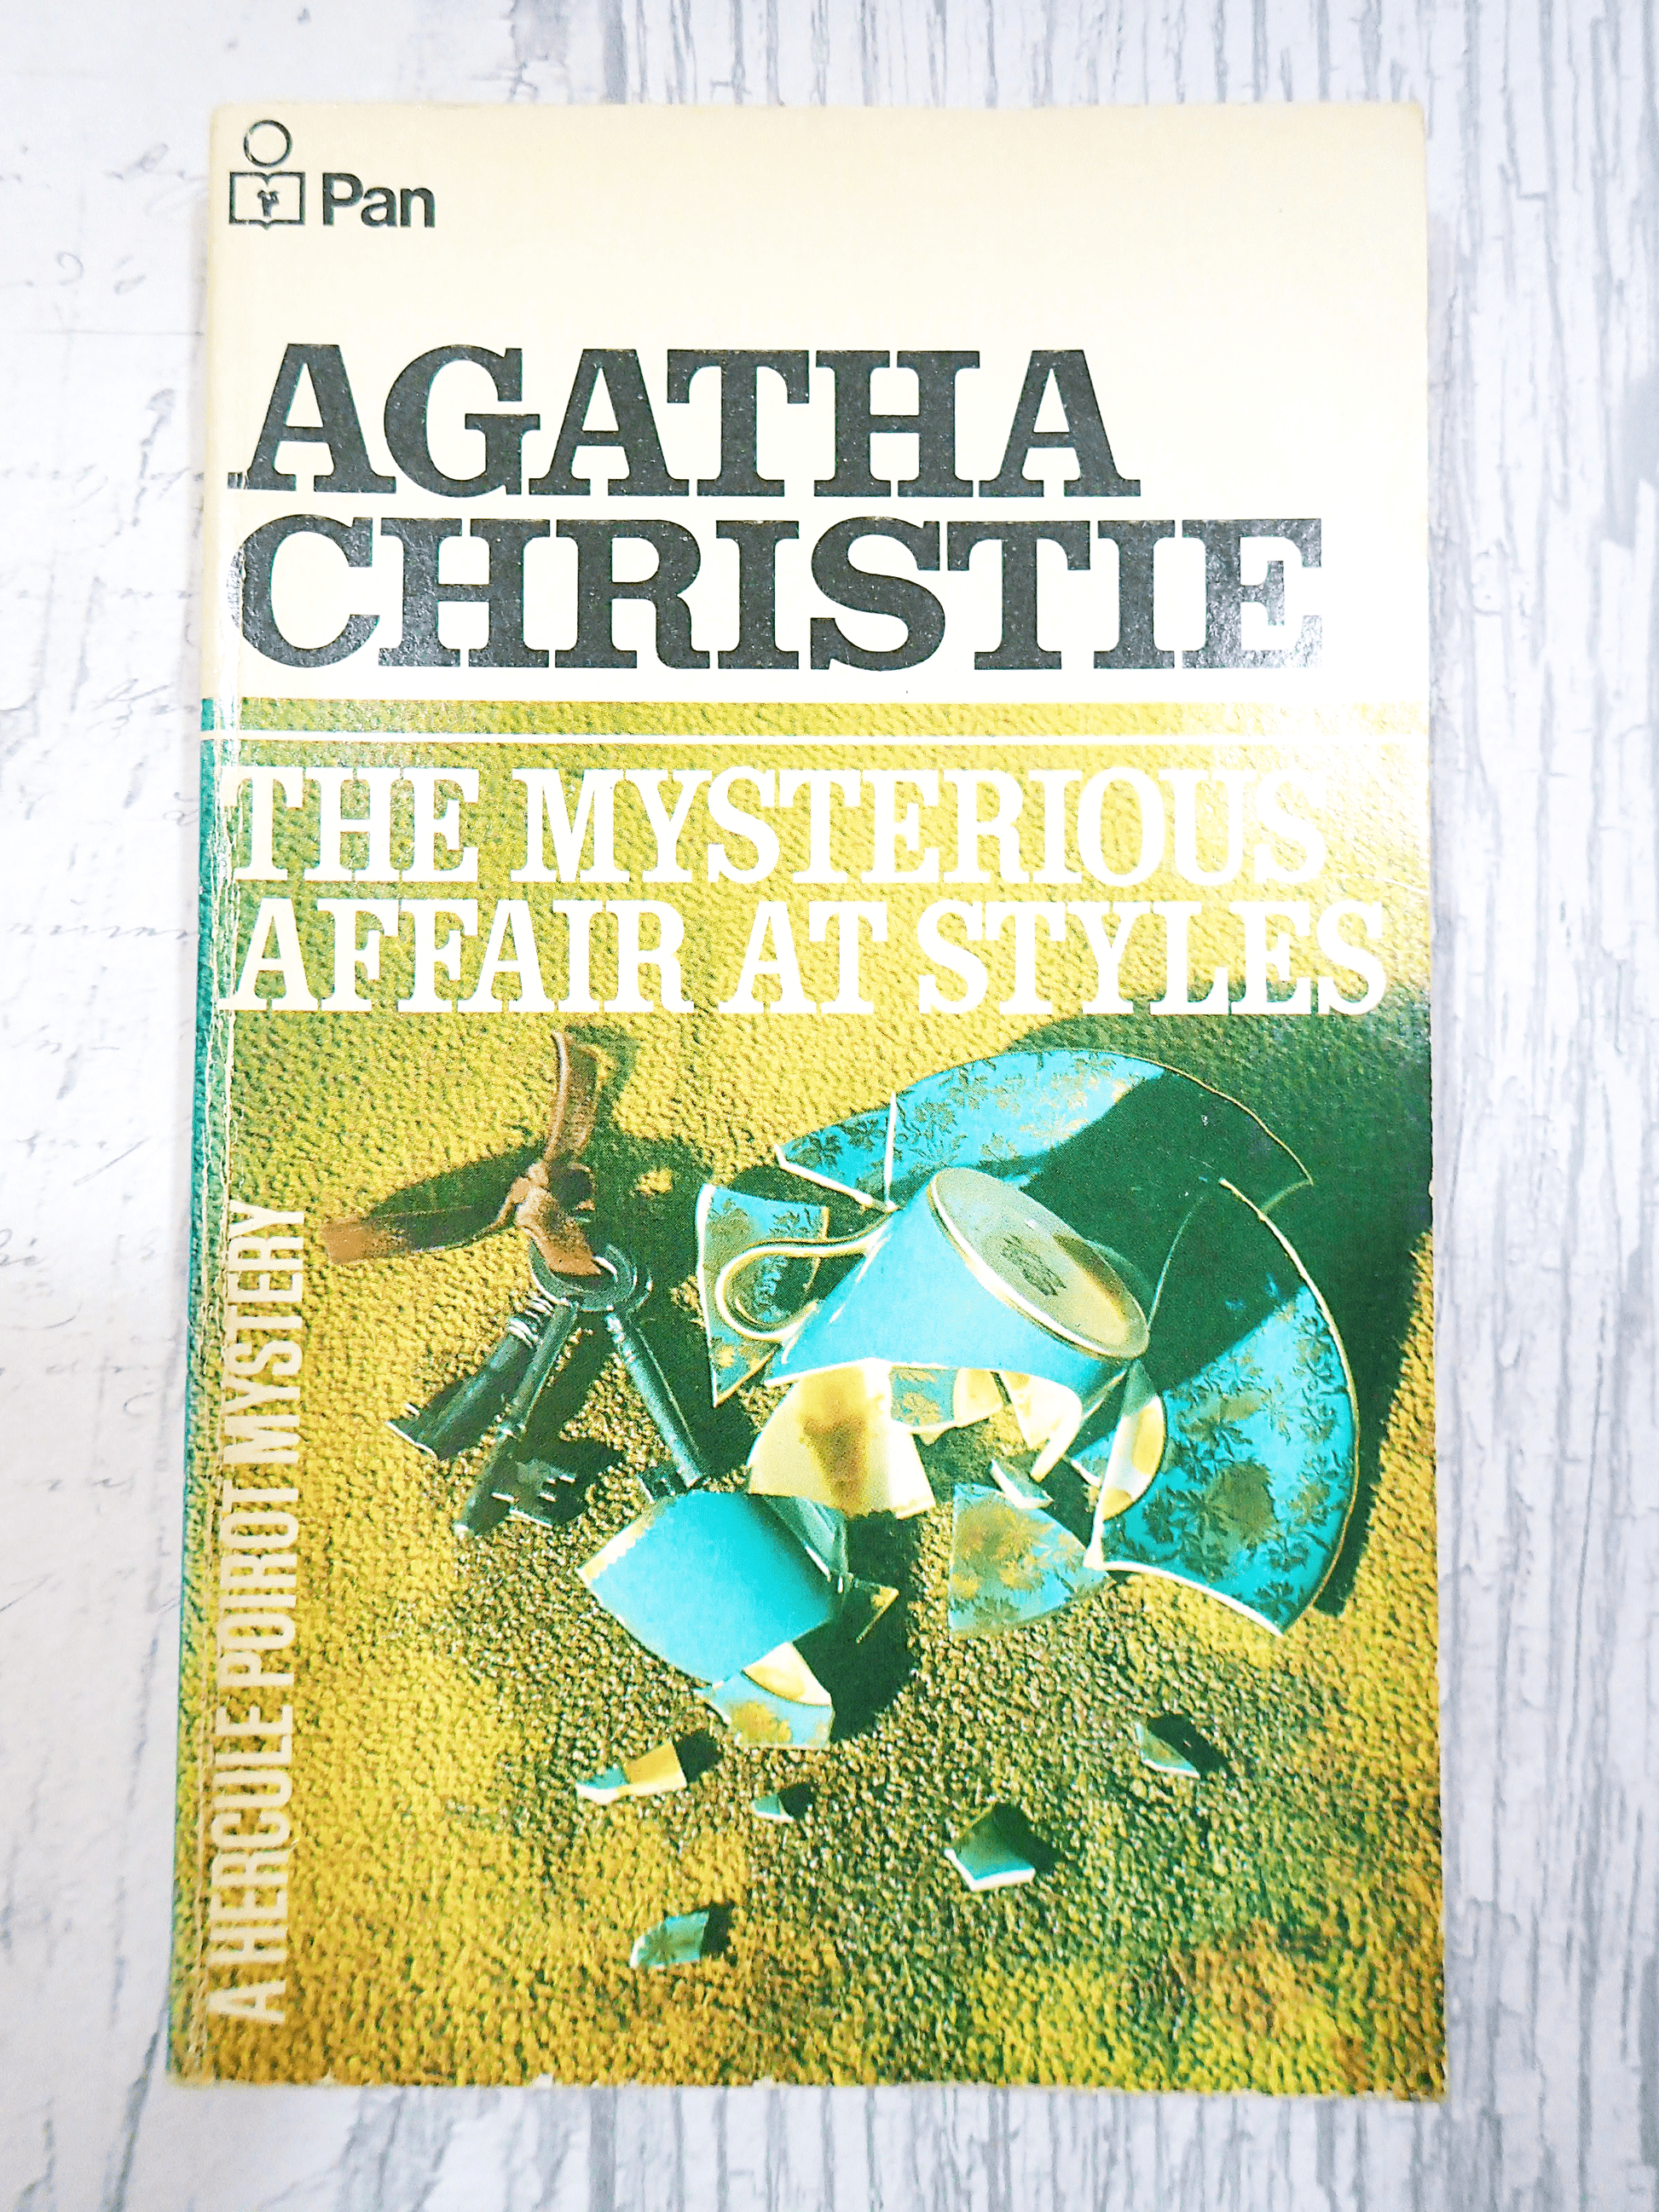 Front cover of Agatha Christie's book The Mysterious Affair at Style, Vintage Pan Paperback, showing a broken coffee cup on the carpet next to a bunch of keys. Against a light background. 